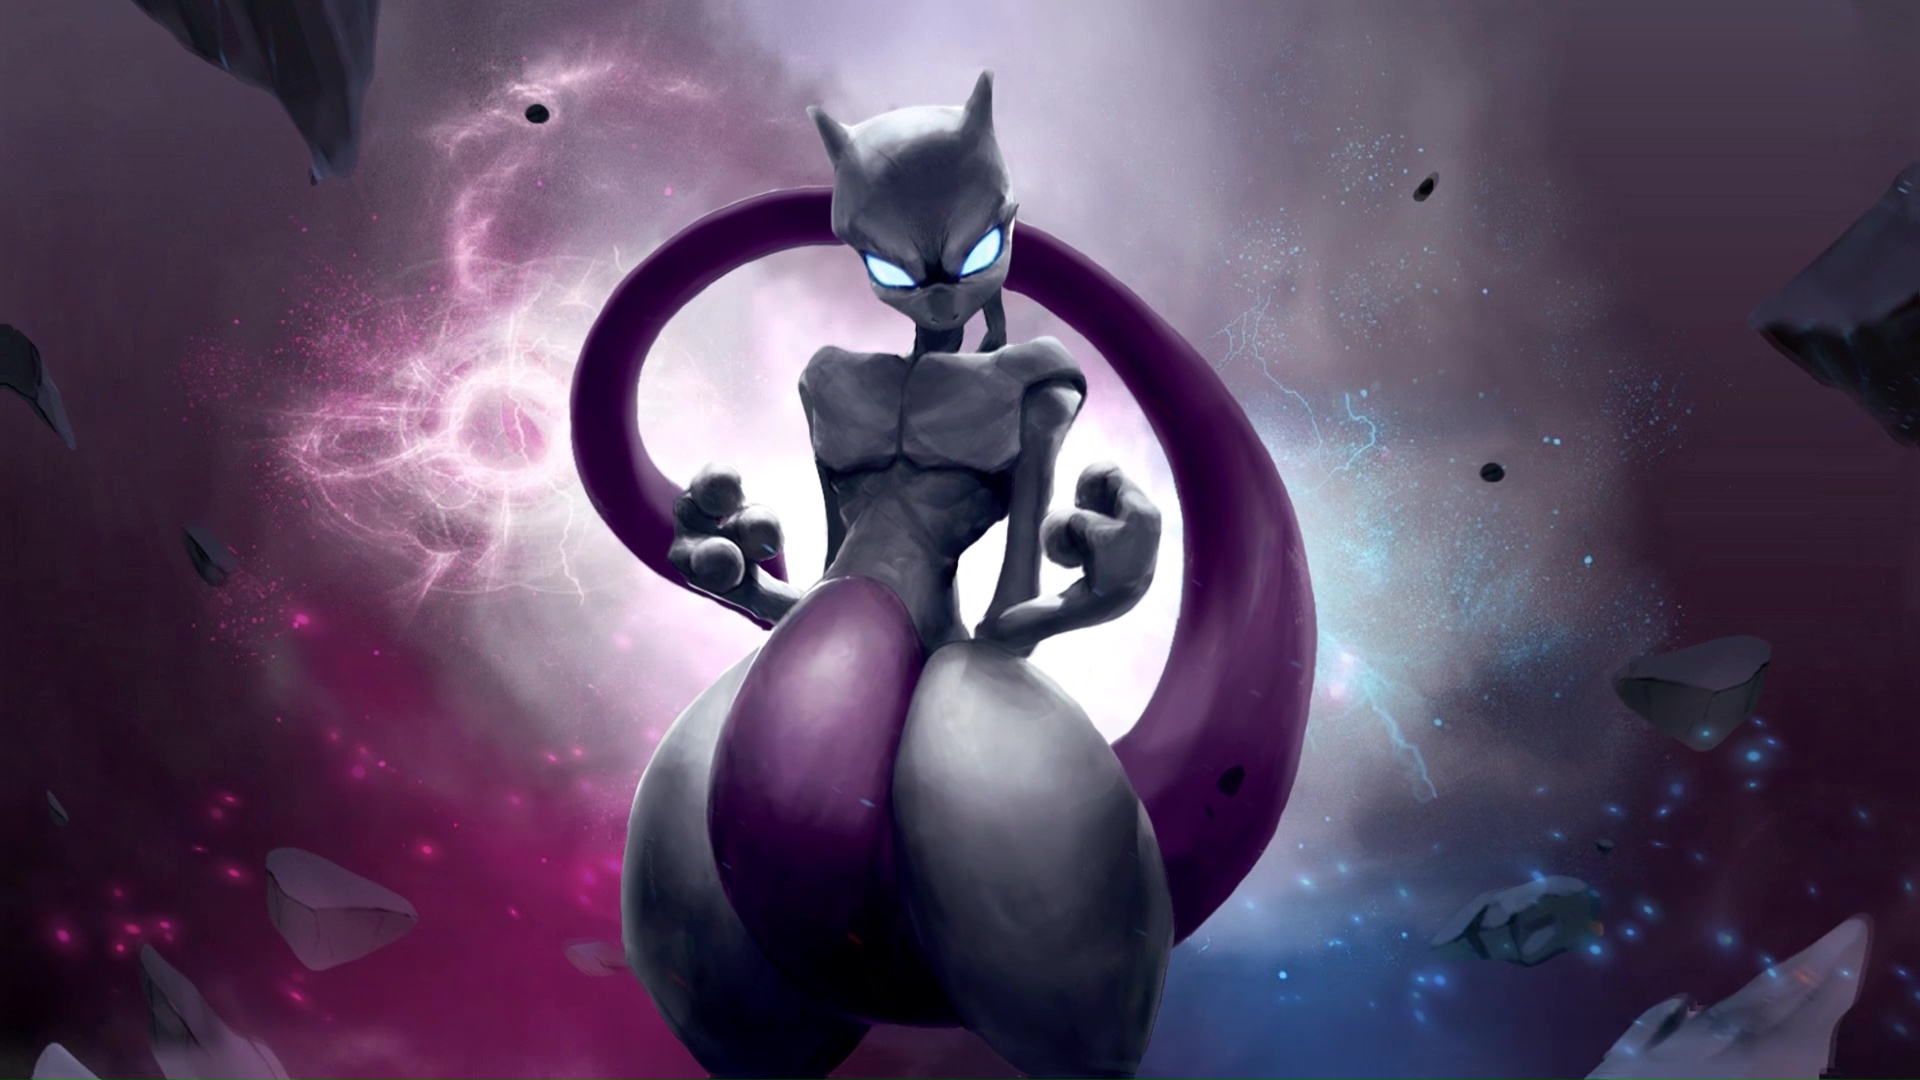 Another Mewtwo iPhone wallpaper  rpokemon